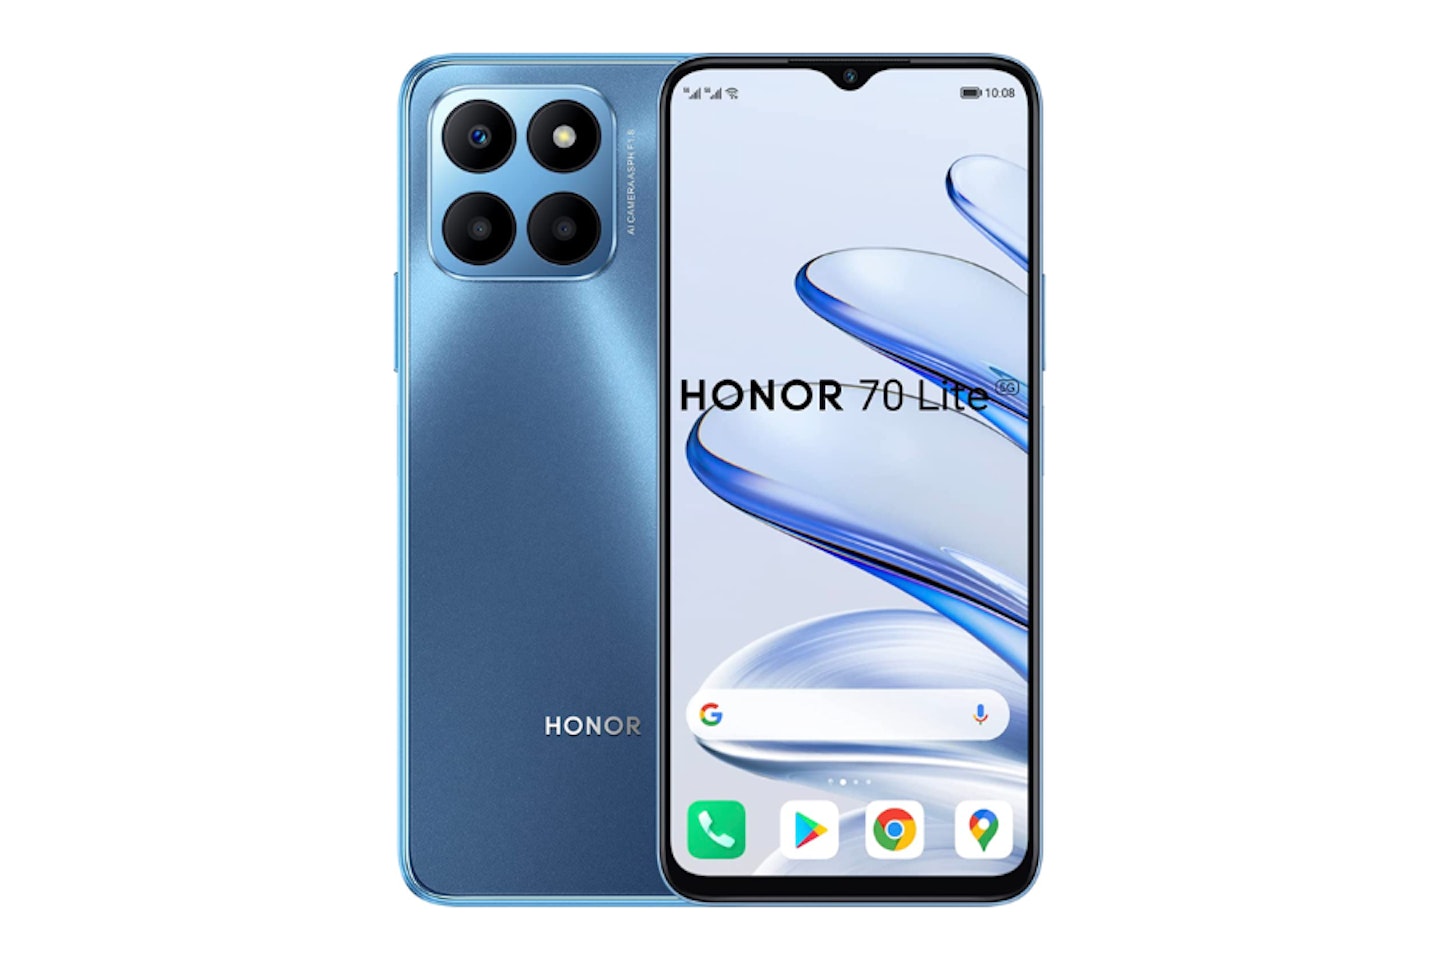 HONOR 70 Lite - one of the best budget smartphones